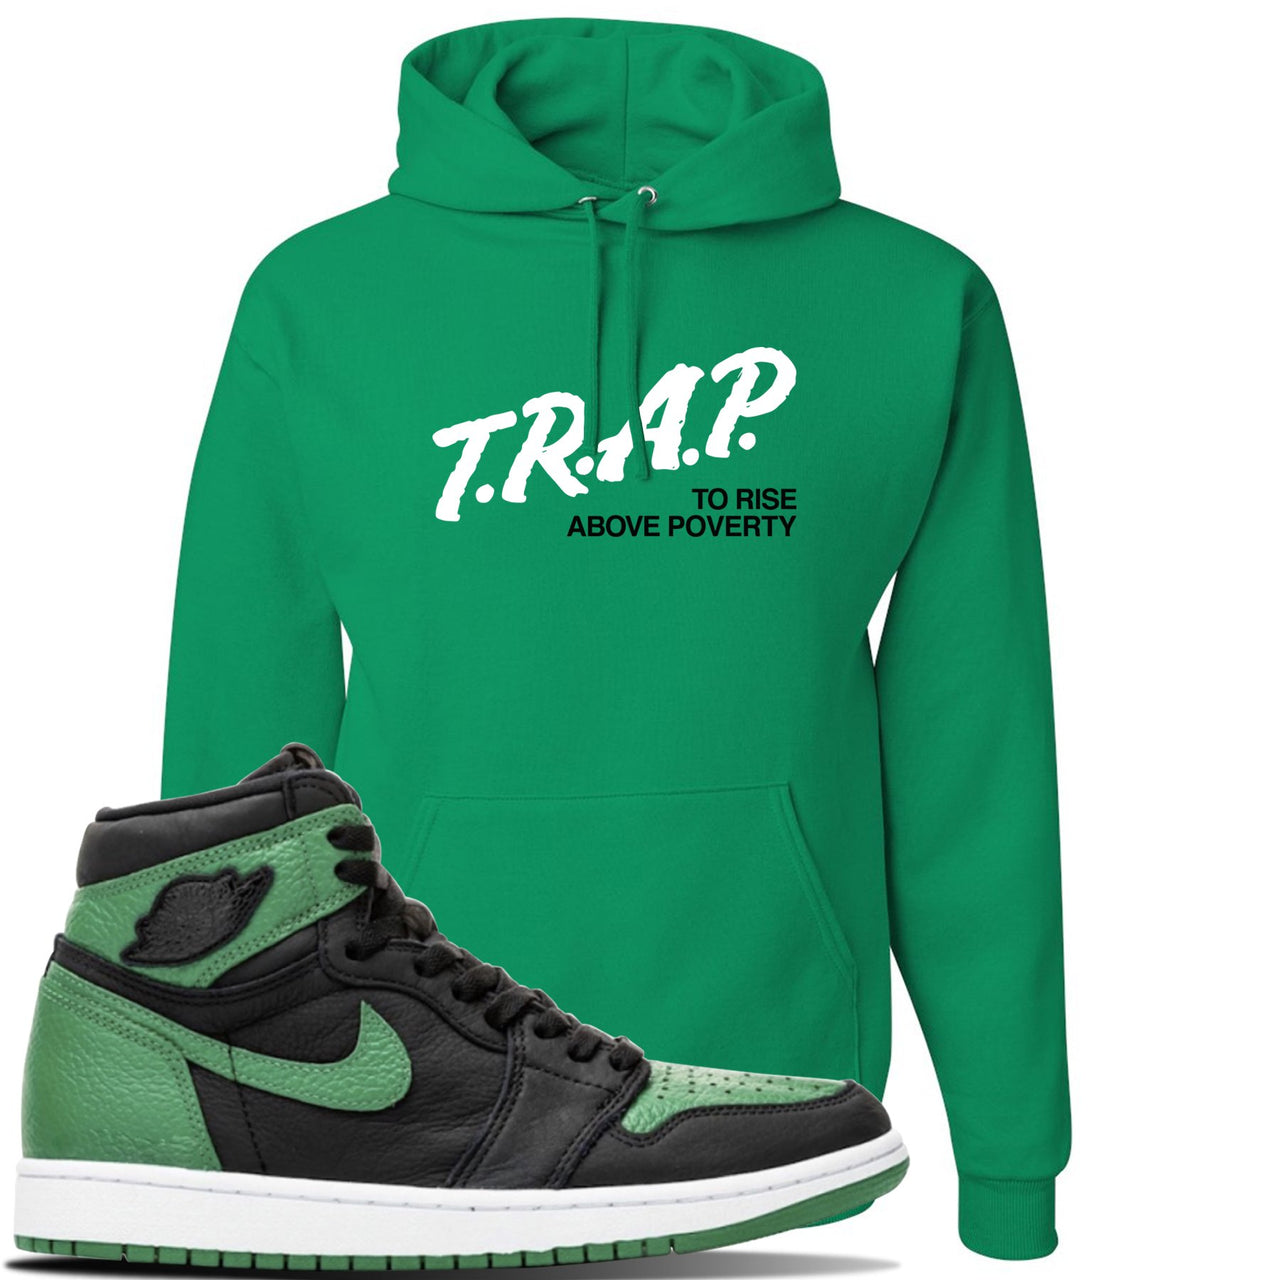 Jordan 1 Retro High OG Pine Green Gym Sneaker Kelly Green Pullover Hoodie | Hoodie to match Air Jordan 1 Retro High OG Pine Green Gym Shoes | Trap To Rise Above Poverty